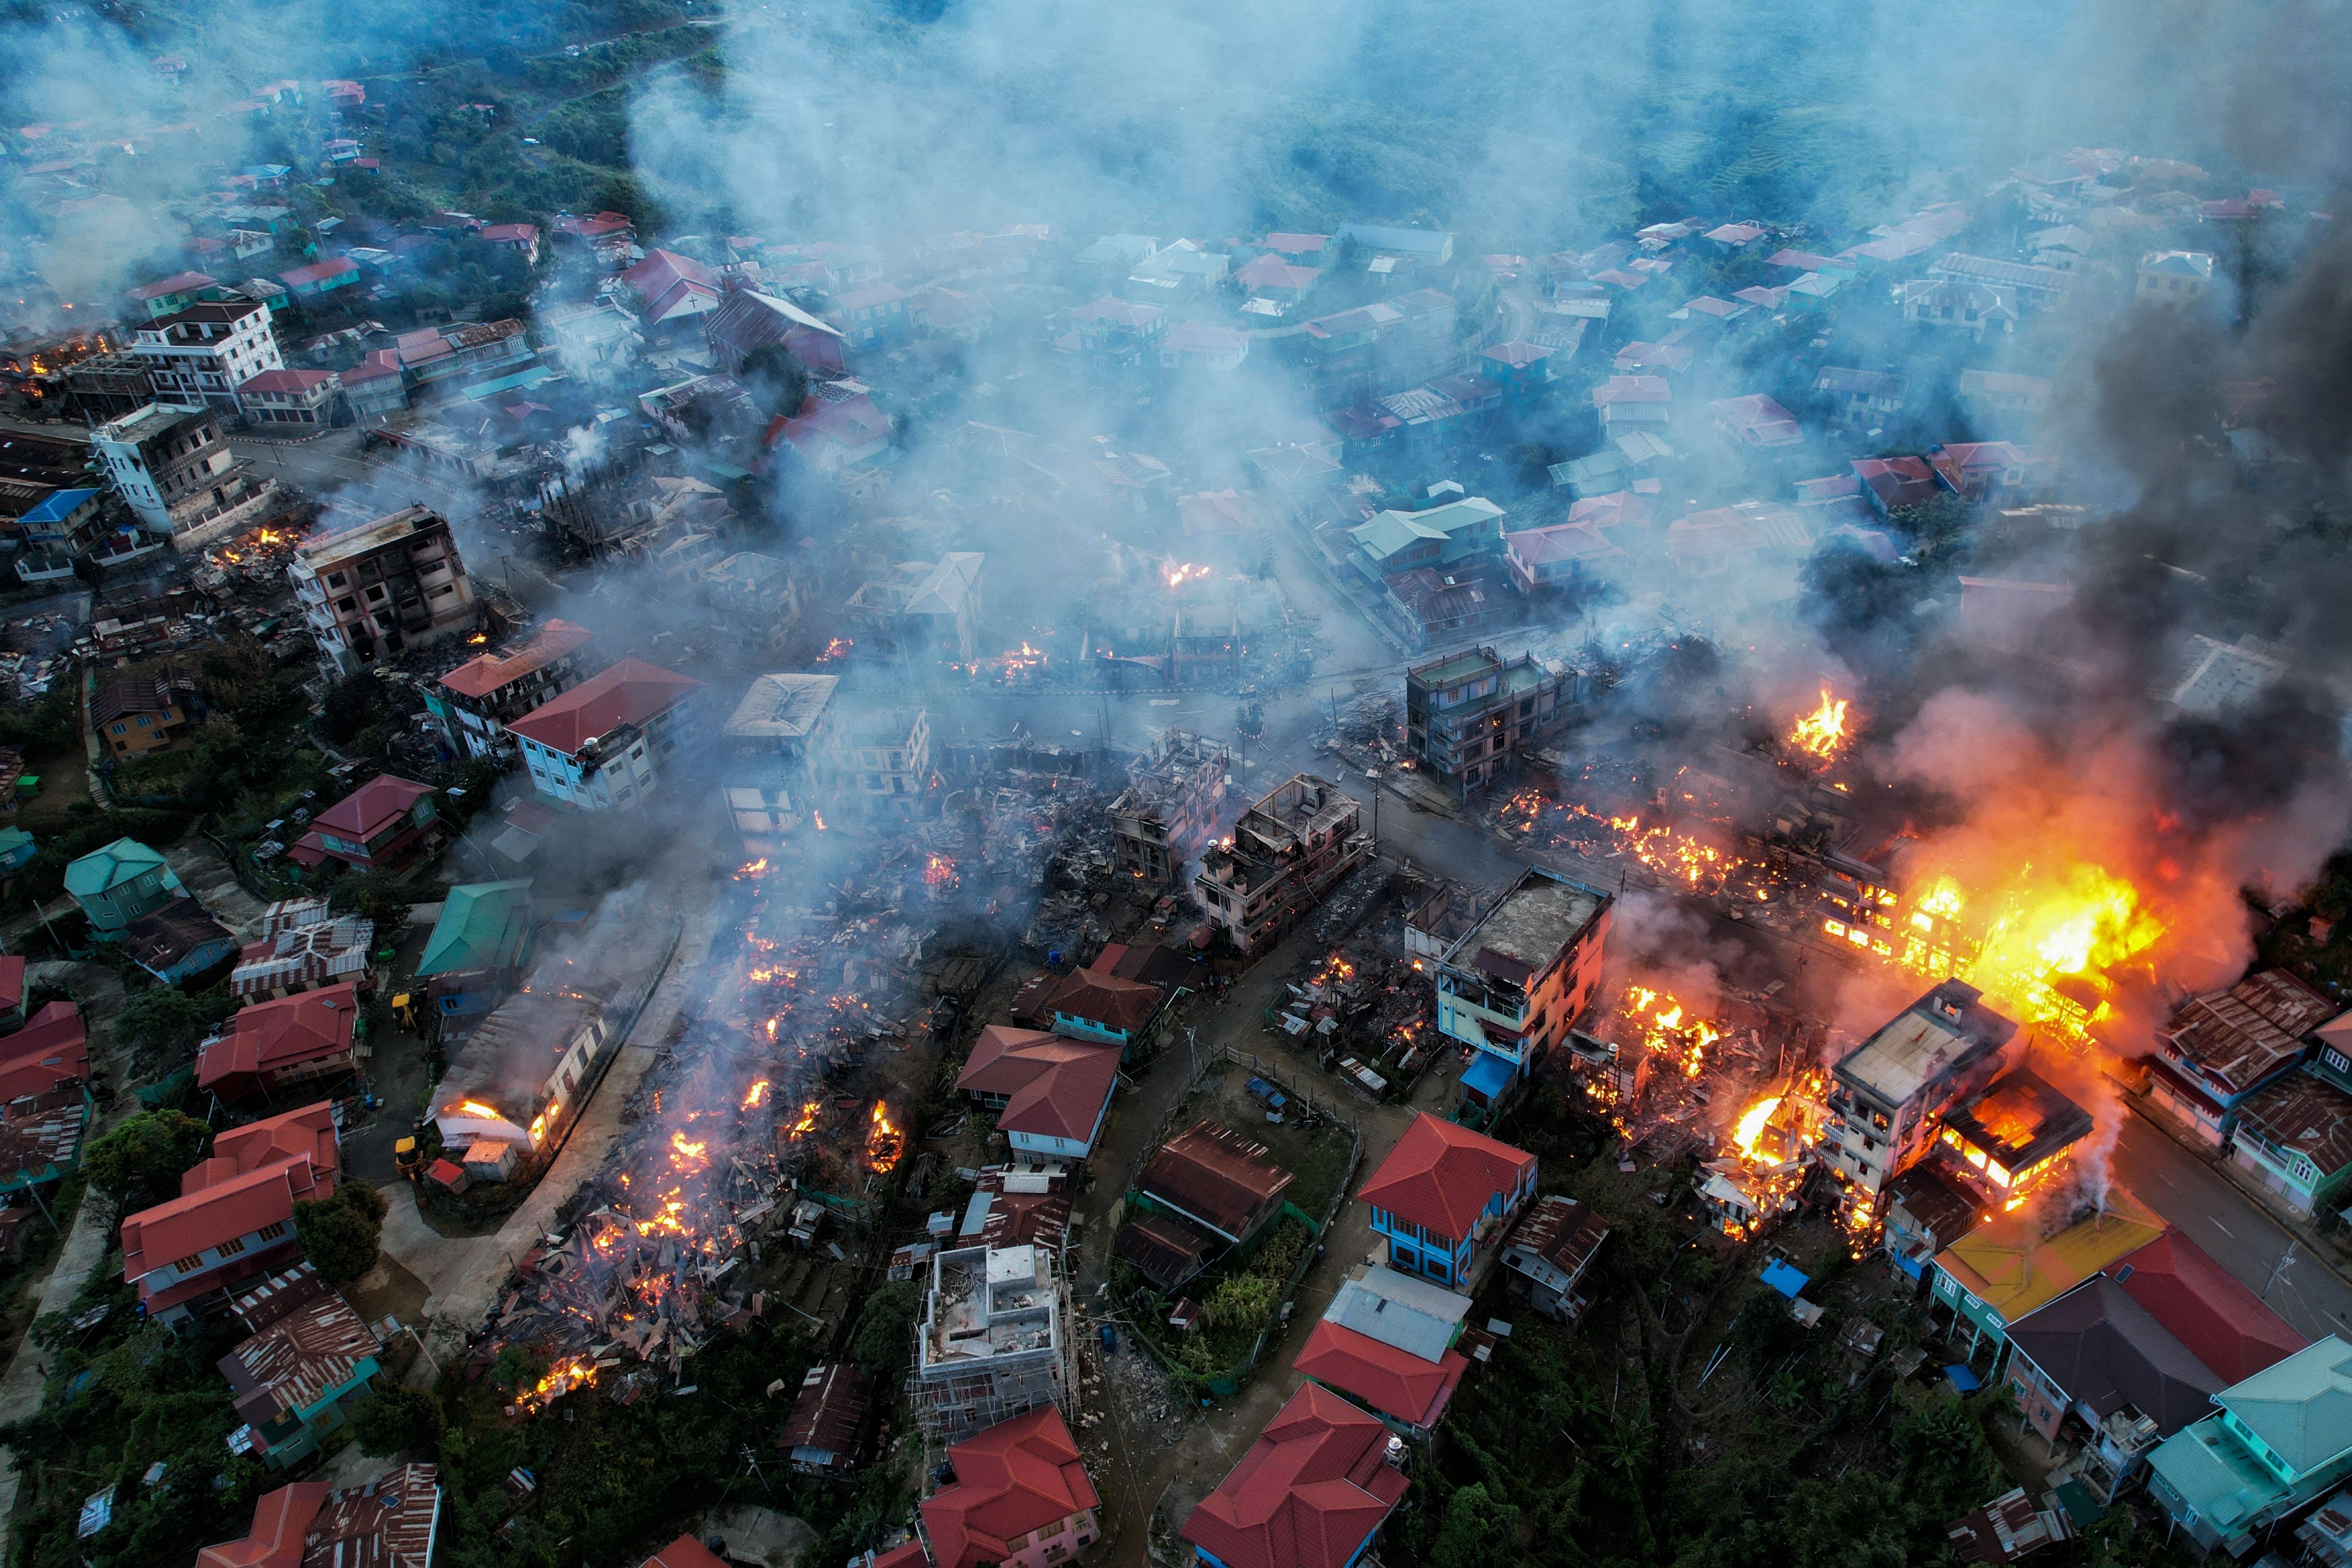 FILE: This aerial photo taken on 29 October 2021 show smokes and fires from Thantlang, in Chin State, where more than 160 buildings have been destroyed caused by shelling from Junta military troops, according to local media